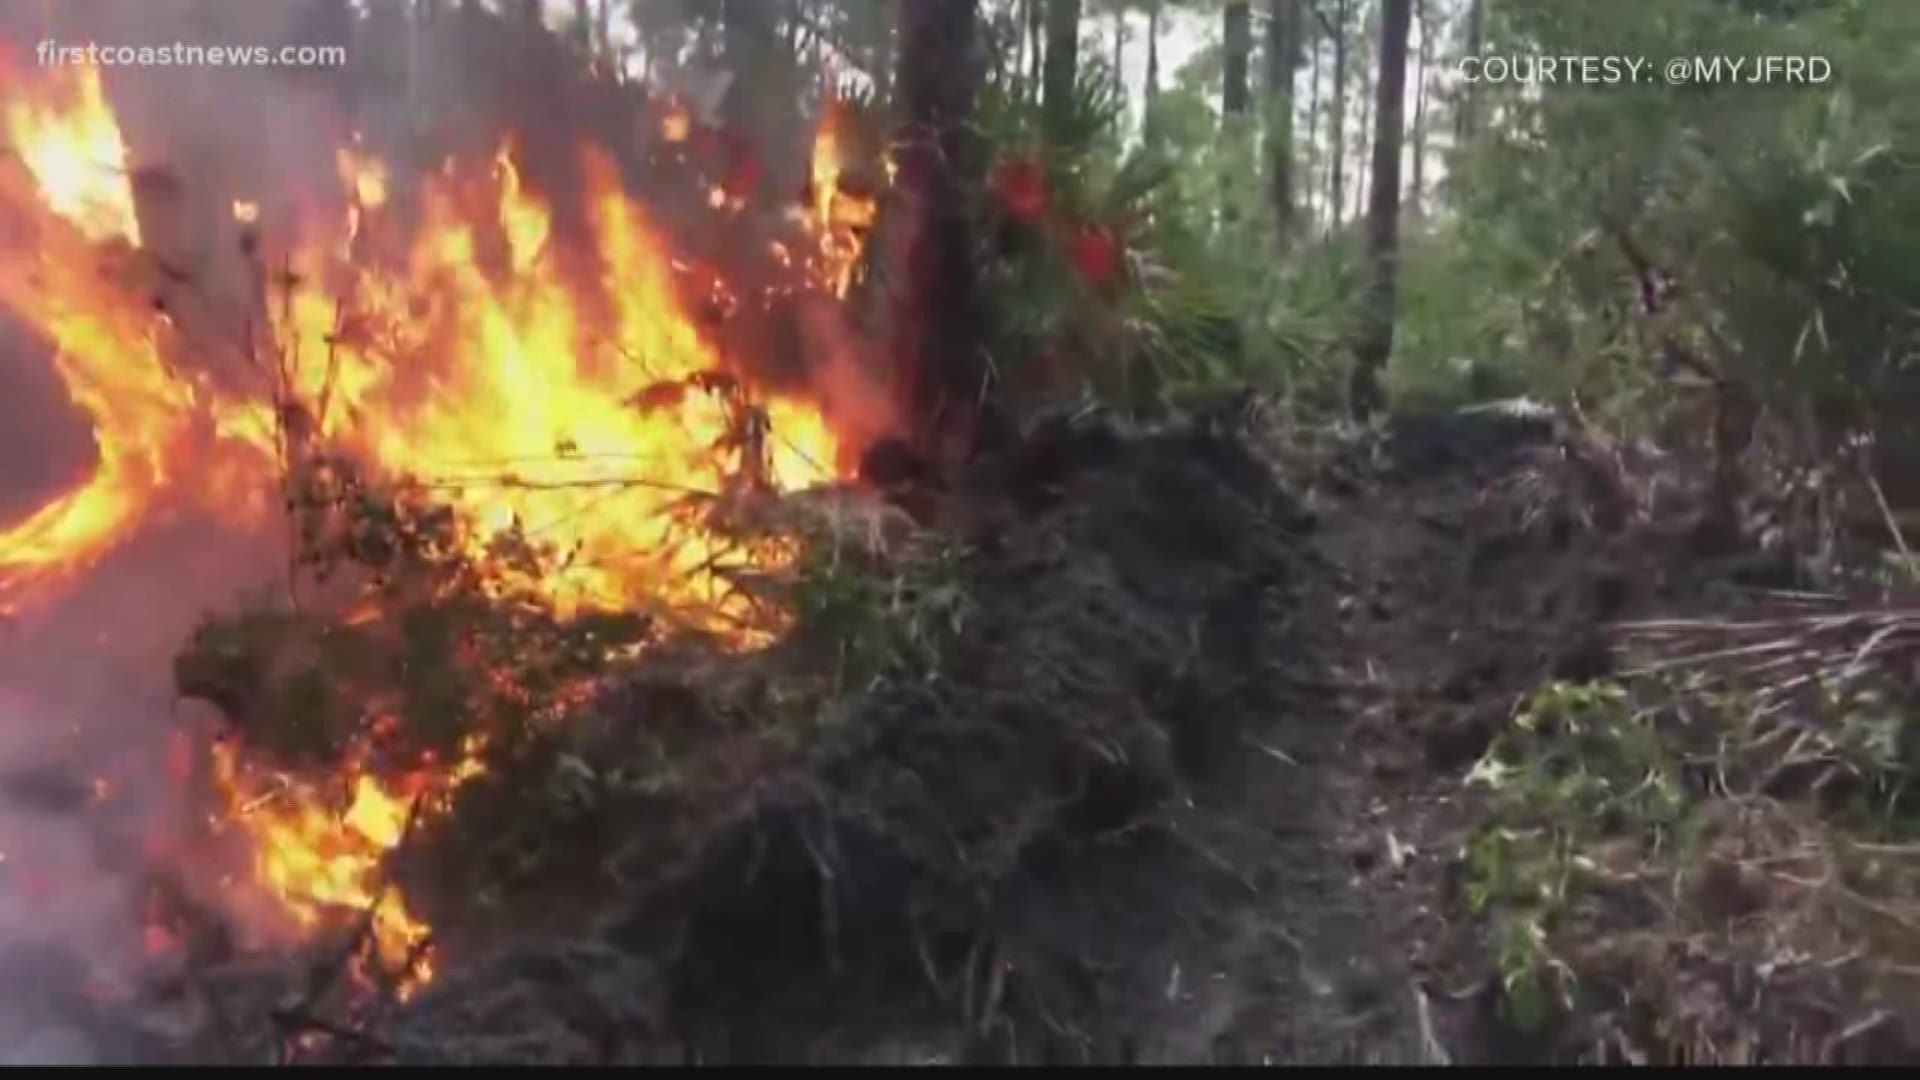 Jacksonville Fire and Rescue Department crews were on the scene of a brush fire near Hodges Boulevard and J Turner Butler Boulevard Saturday afternoon.